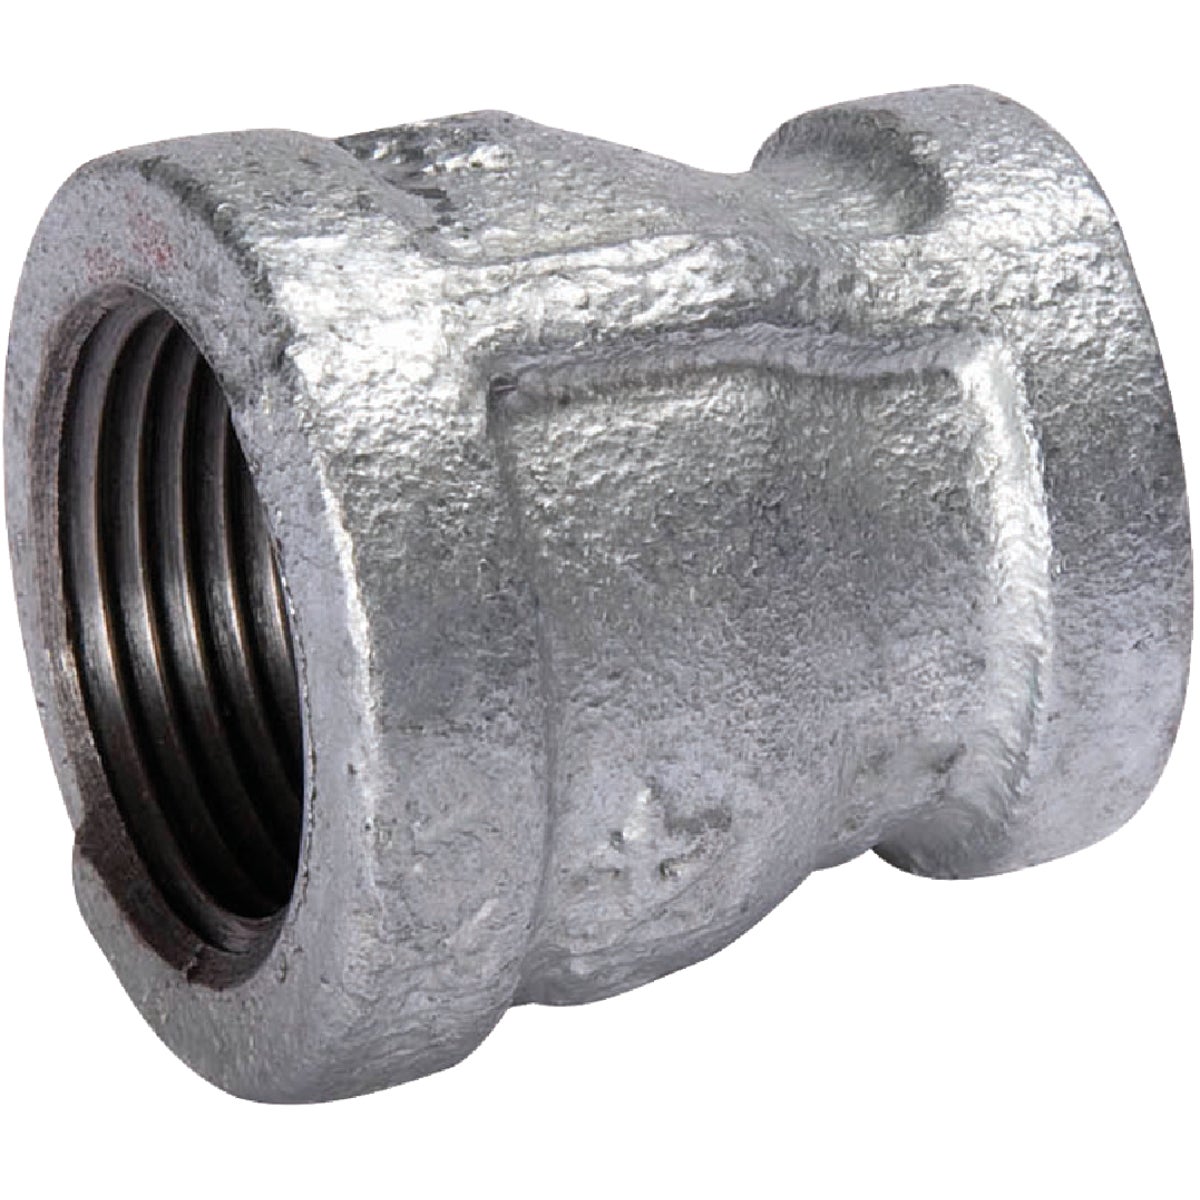 Southland 1/2 In. x 1/4 In. FPT Reducing Galvanized Coupling